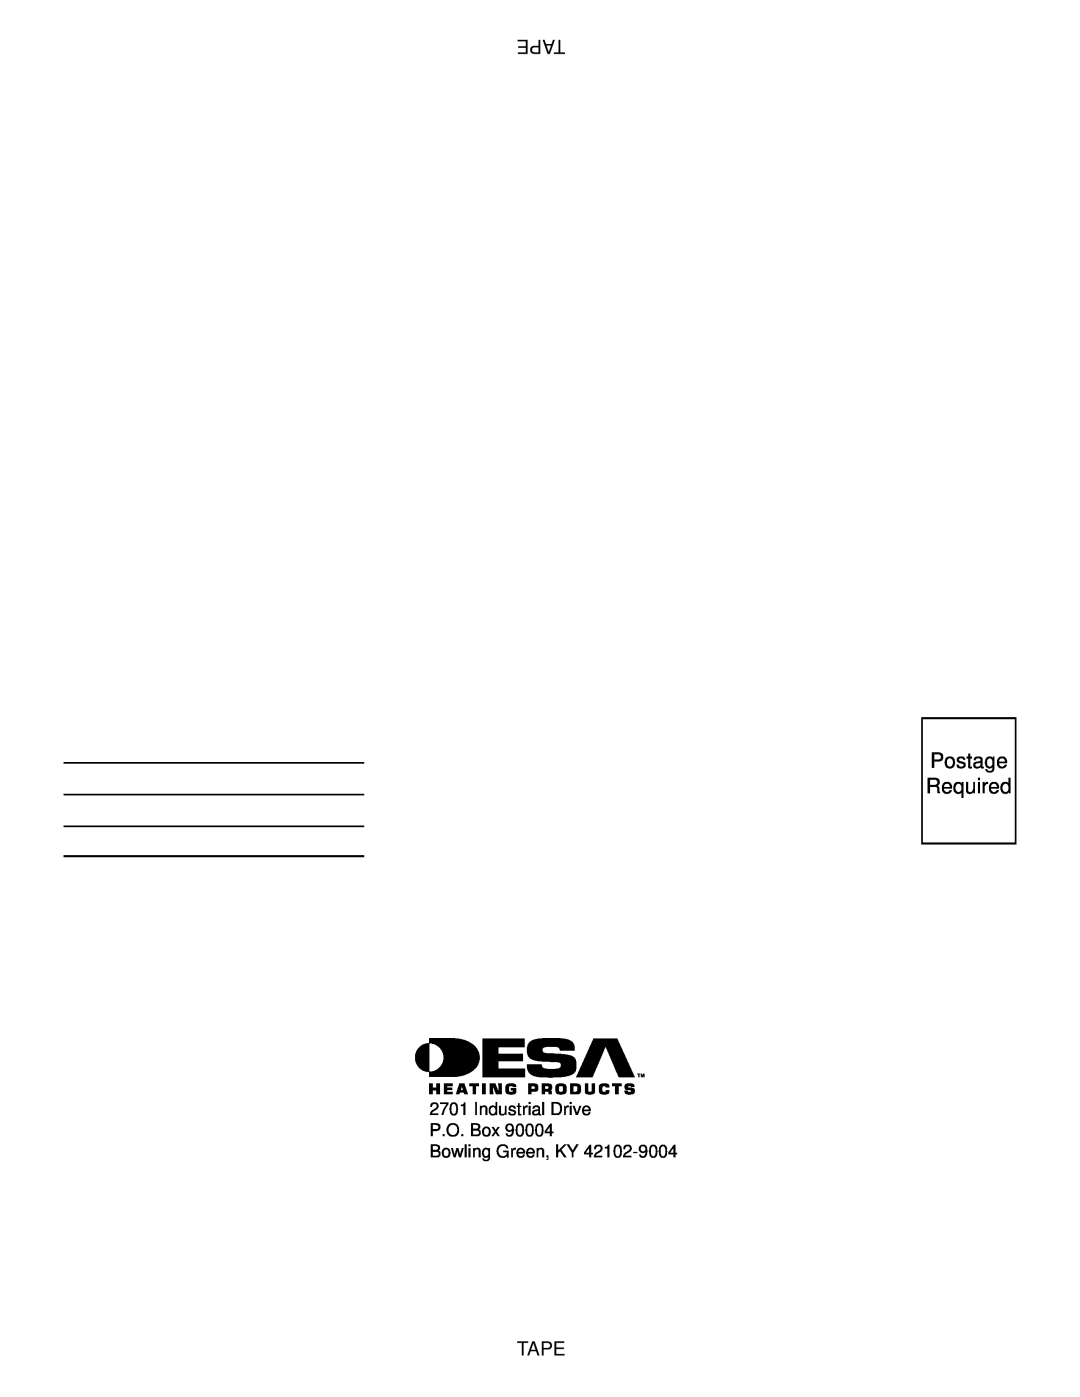 Desa CGEFP33PRB, CGEFP33NRB installation manual Postage Required, Tape, Industrial Drive P.O. Box Bowling Green, KY 